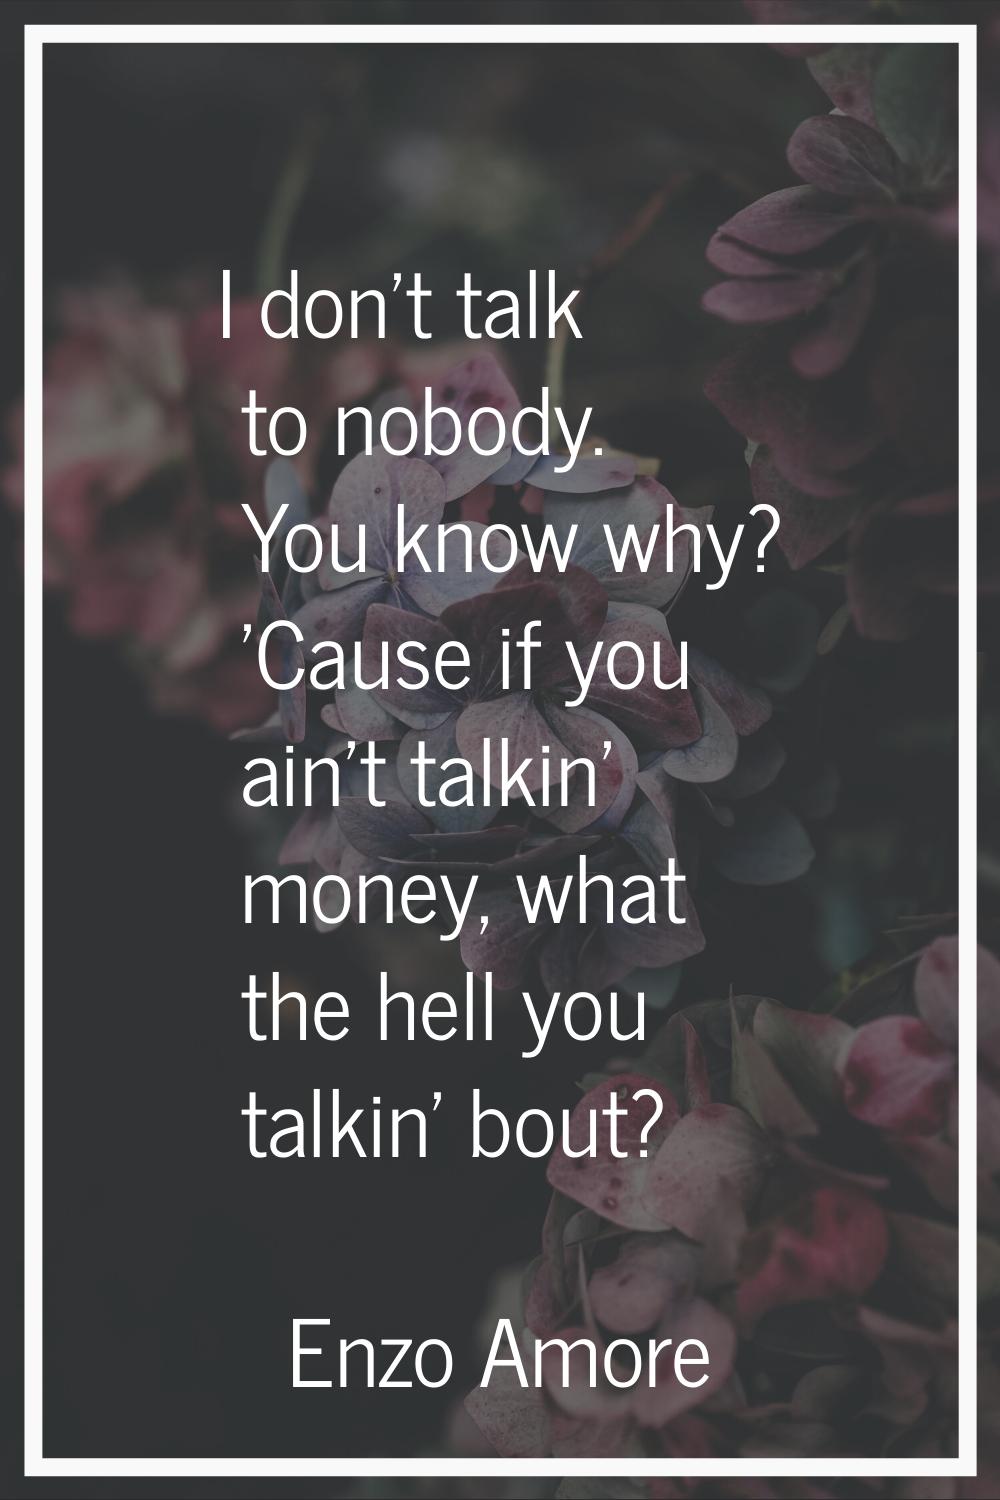 I don't talk to nobody. You know why? 'Cause if you ain't talkin' money, what the hell you talkin' 